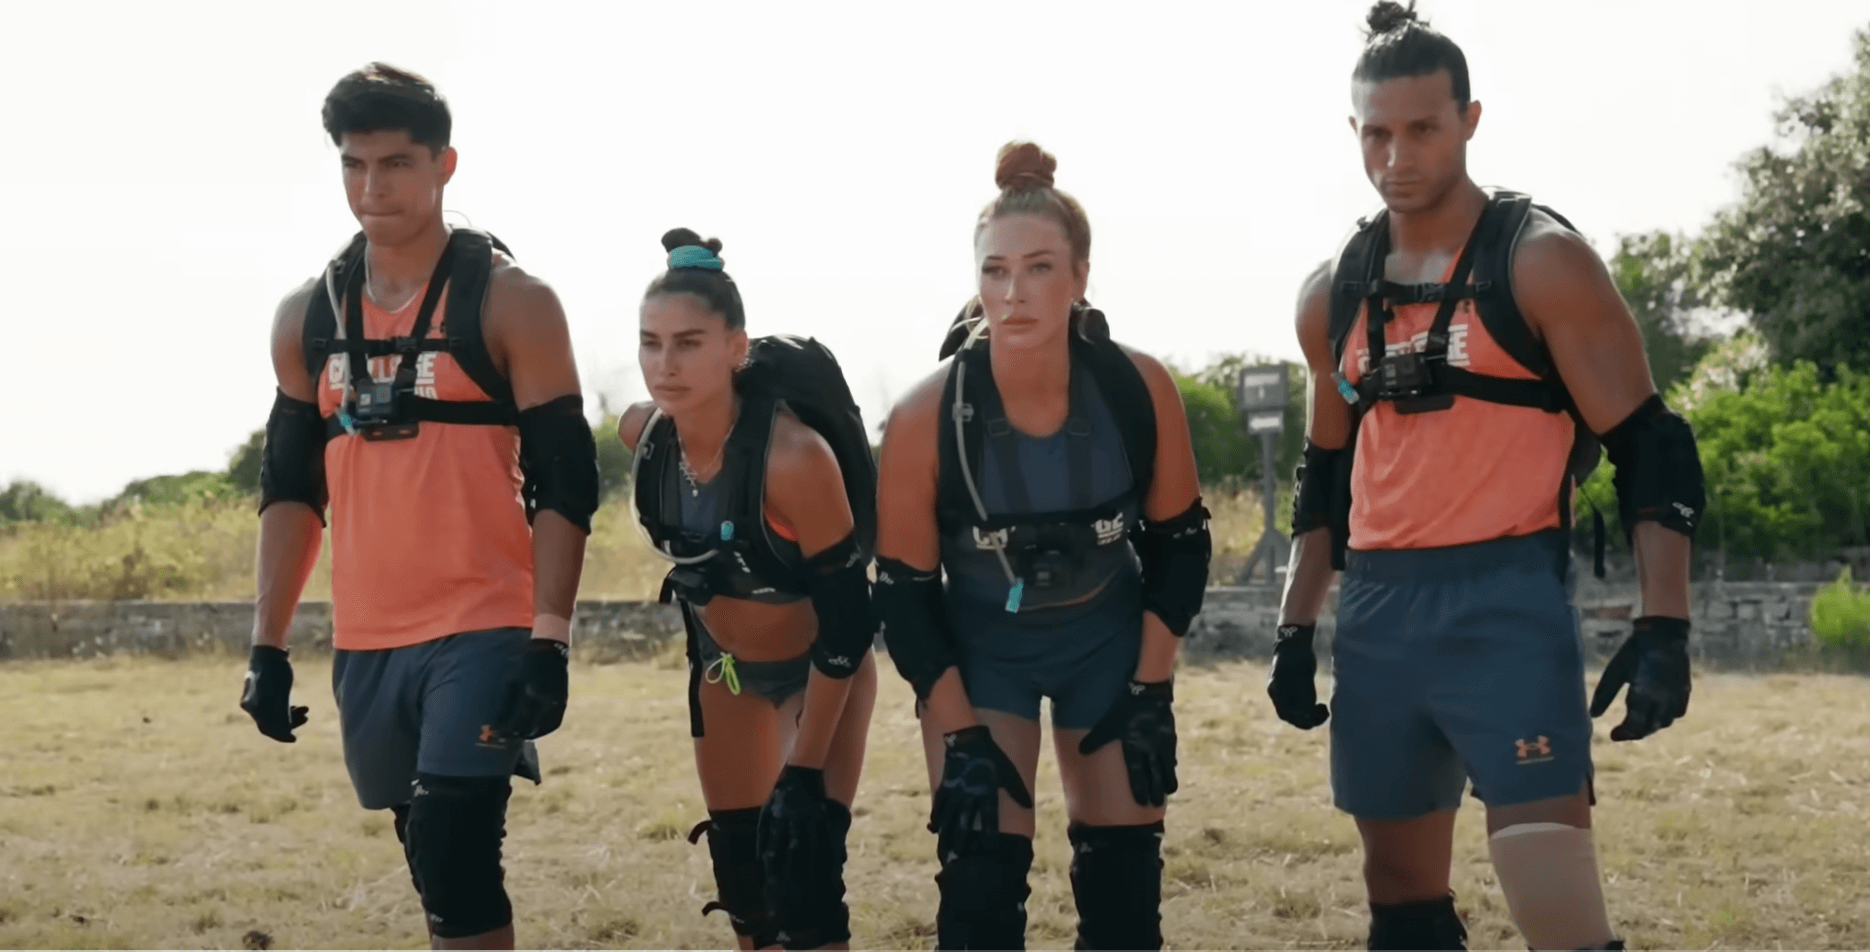 MTV's 'The Challenge' Season 39 promo showing 4 competitors dressed in orange in a field ready to start a challenge